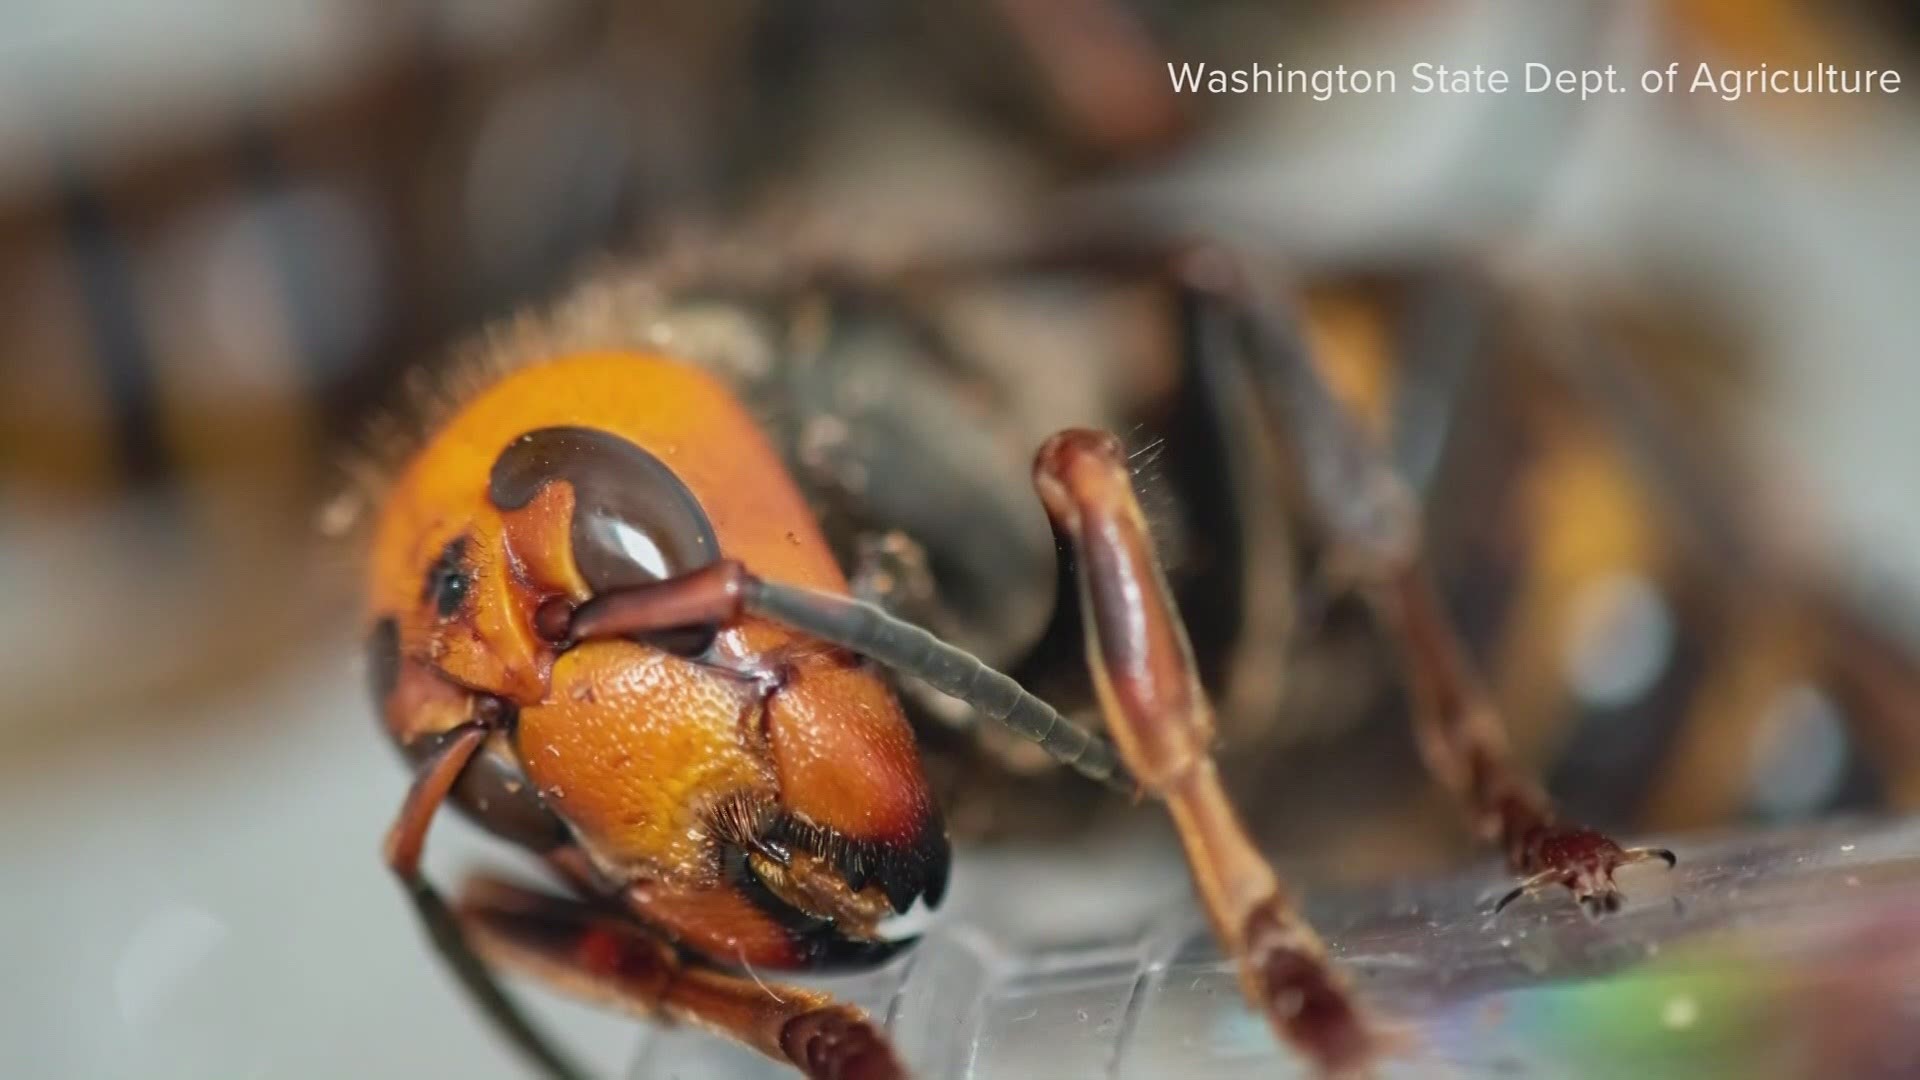 Officials want to impose a quarantine on all live hornets, which would outlaw the sale, distribution or knowing movement of hornets in Washington state.